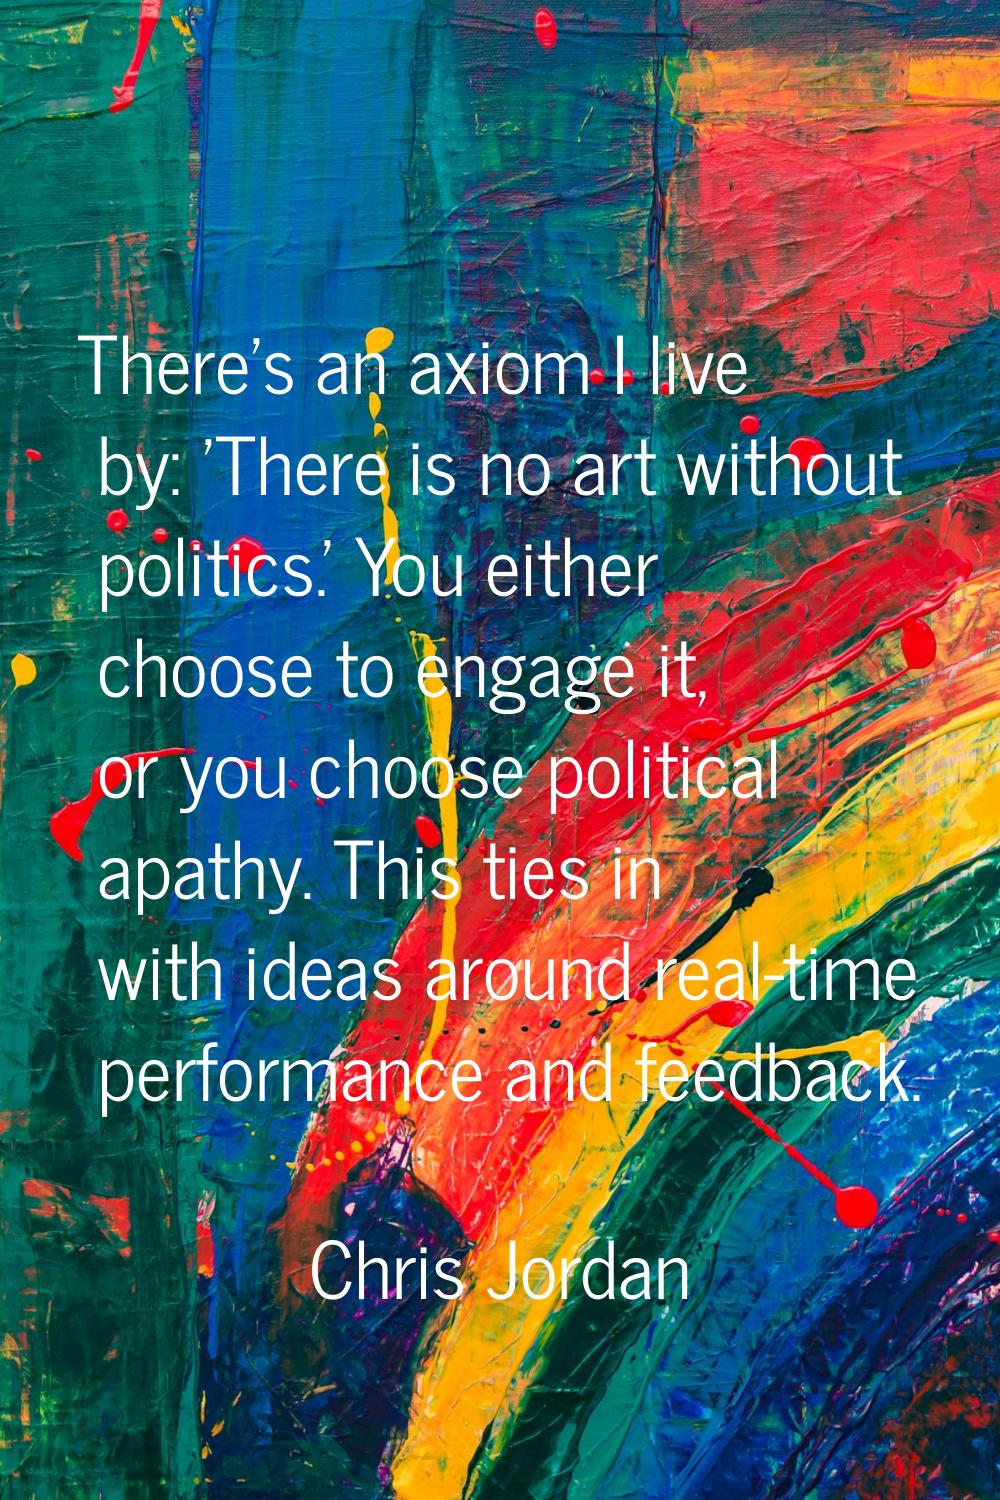 There's an axiom I live by: 'There is no art without politics.' You either choose to engage it, or 